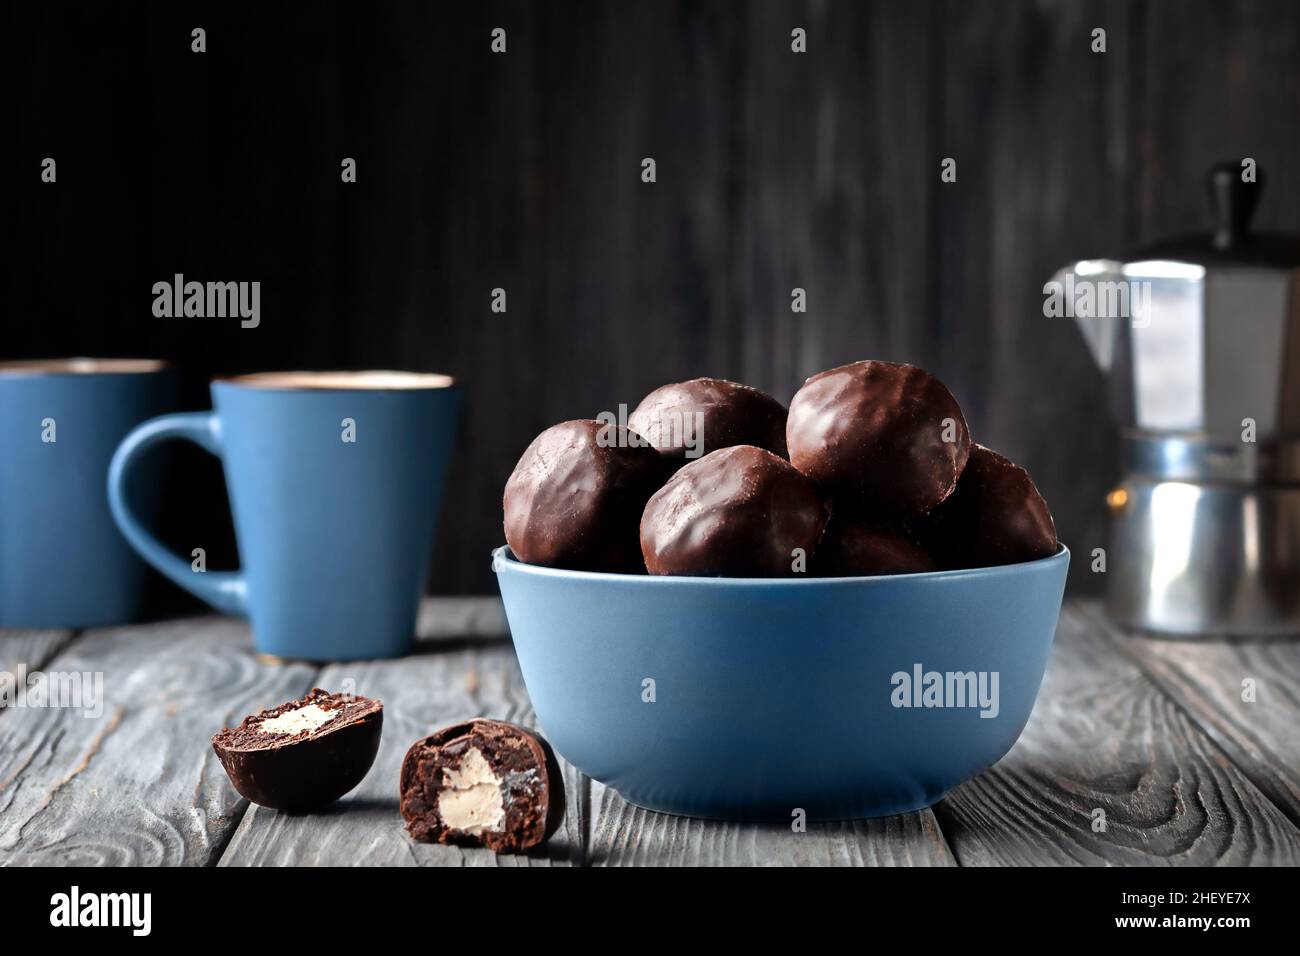 Dark chocolate balls with marshmallow filling and a cup of coffee on wooden background Stock Photo